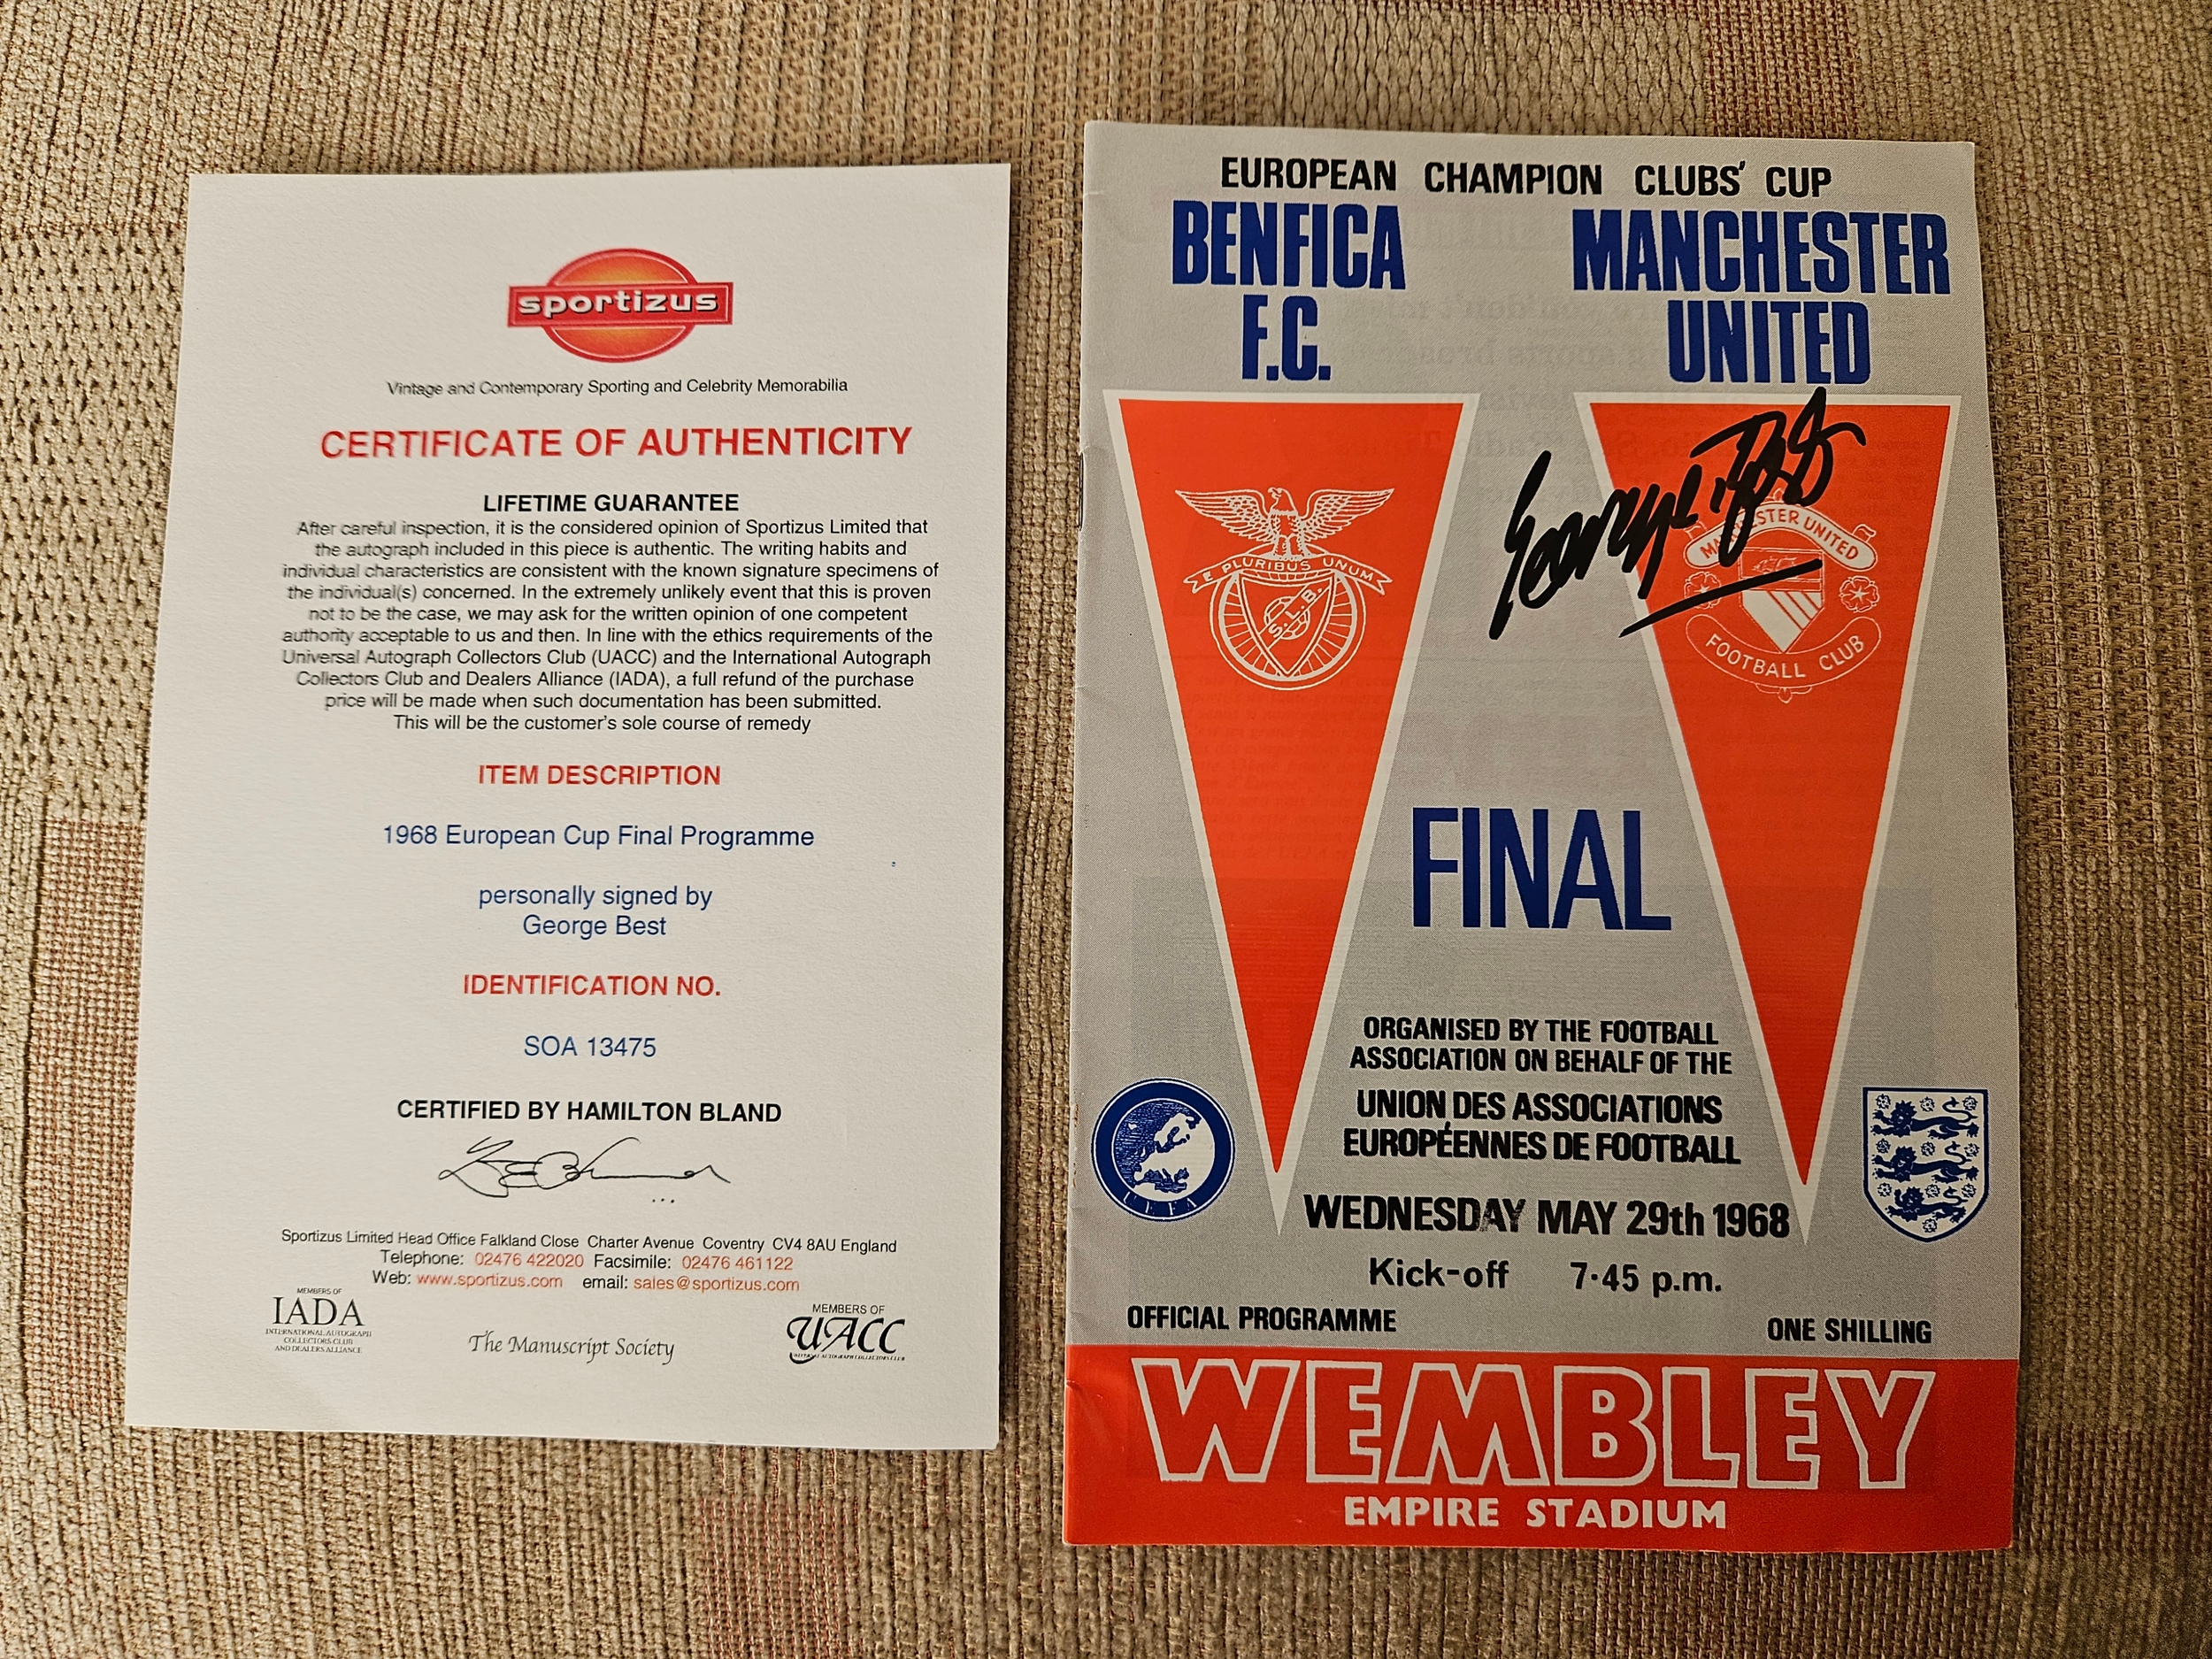 GEORGE BEST 1967 MATCH WORN MANCHESTER UNITED JERSEY AND A 1968 EUROPEAN CUP FINAL SIGNED - Image 8 of 14